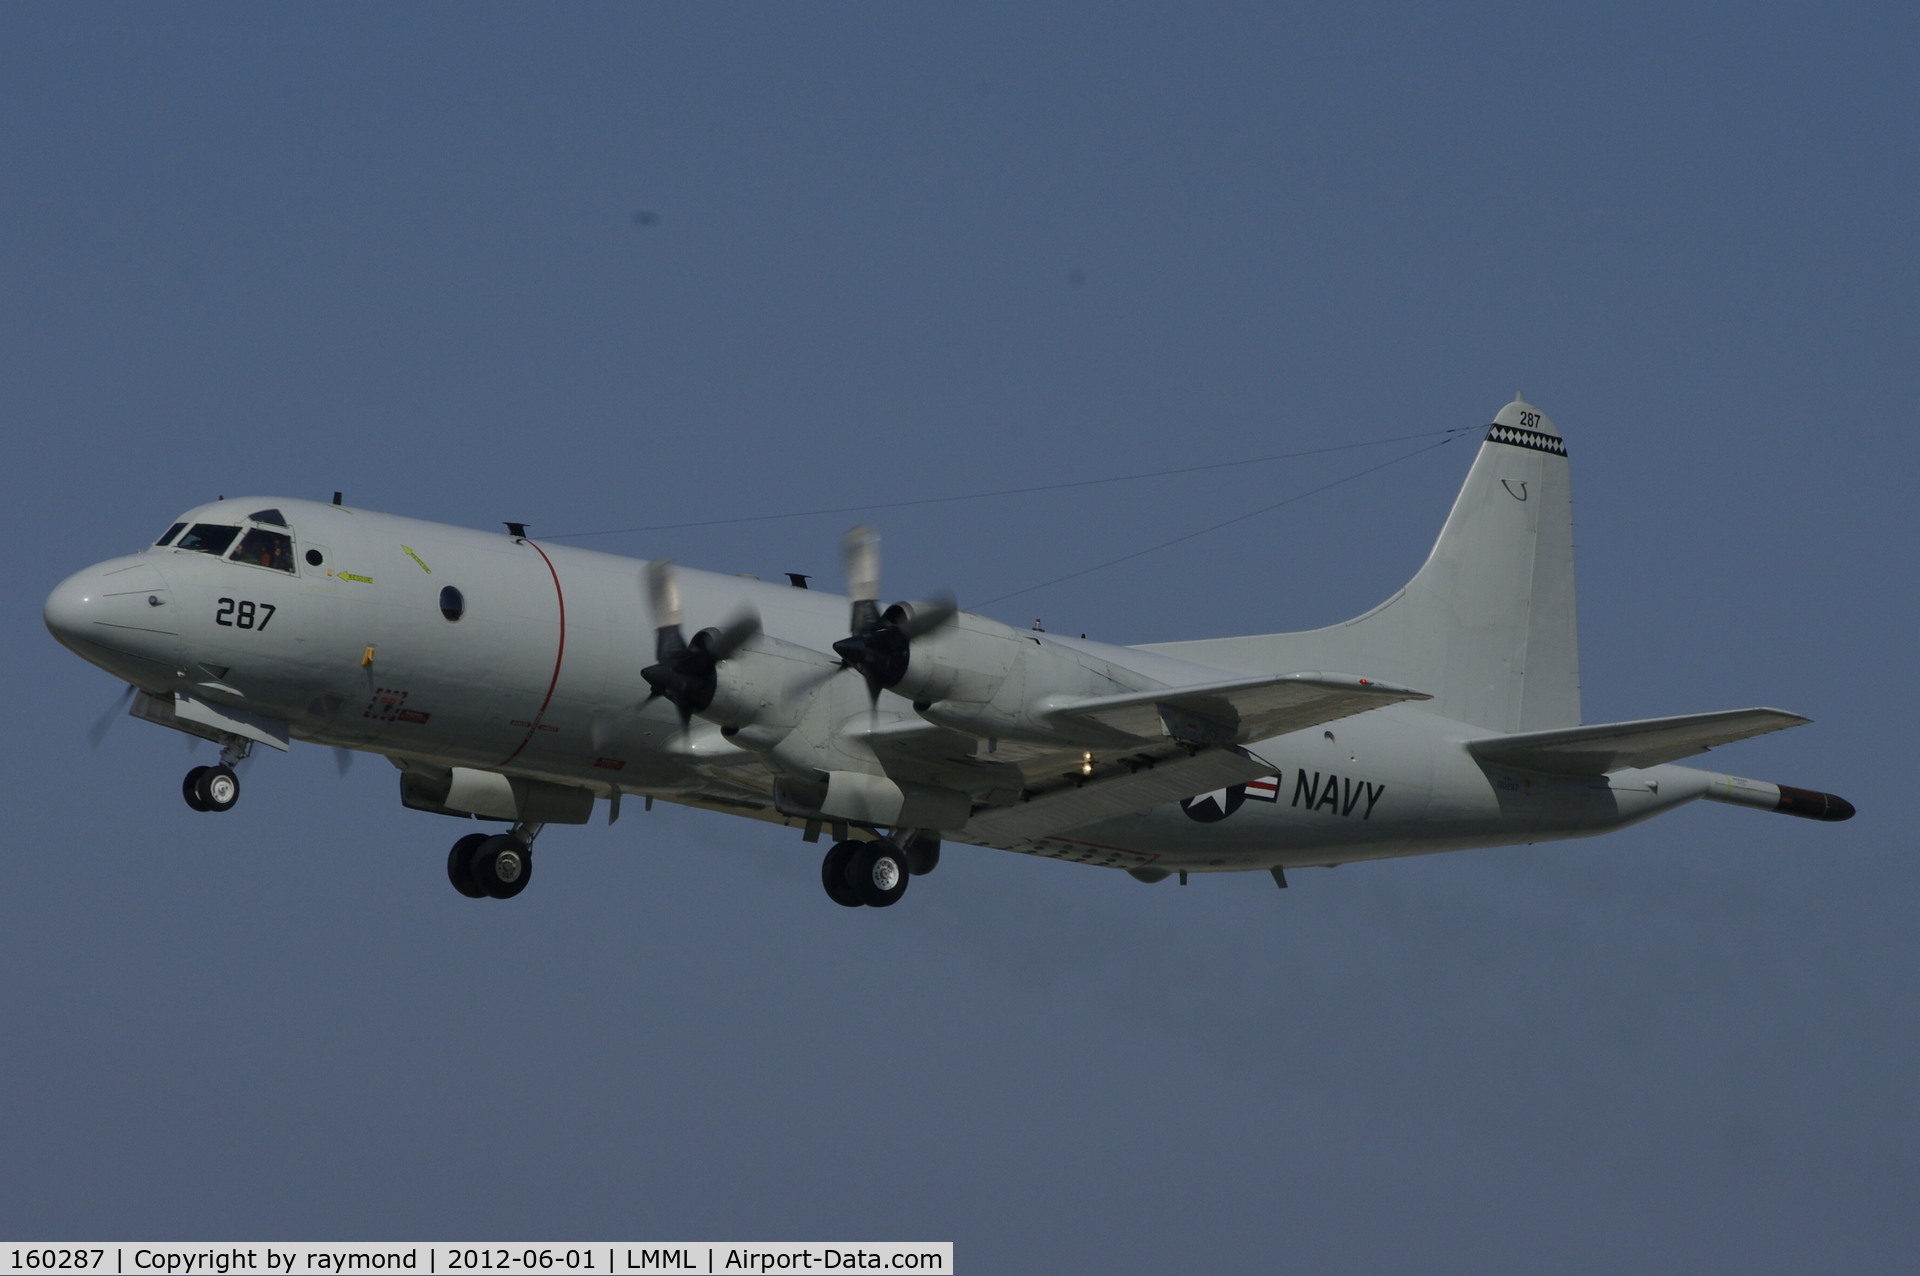 160287, Lockheed P-3C Orion C/N 285A-5650, P-3C Orion 160287 US Navy during  circuit training.